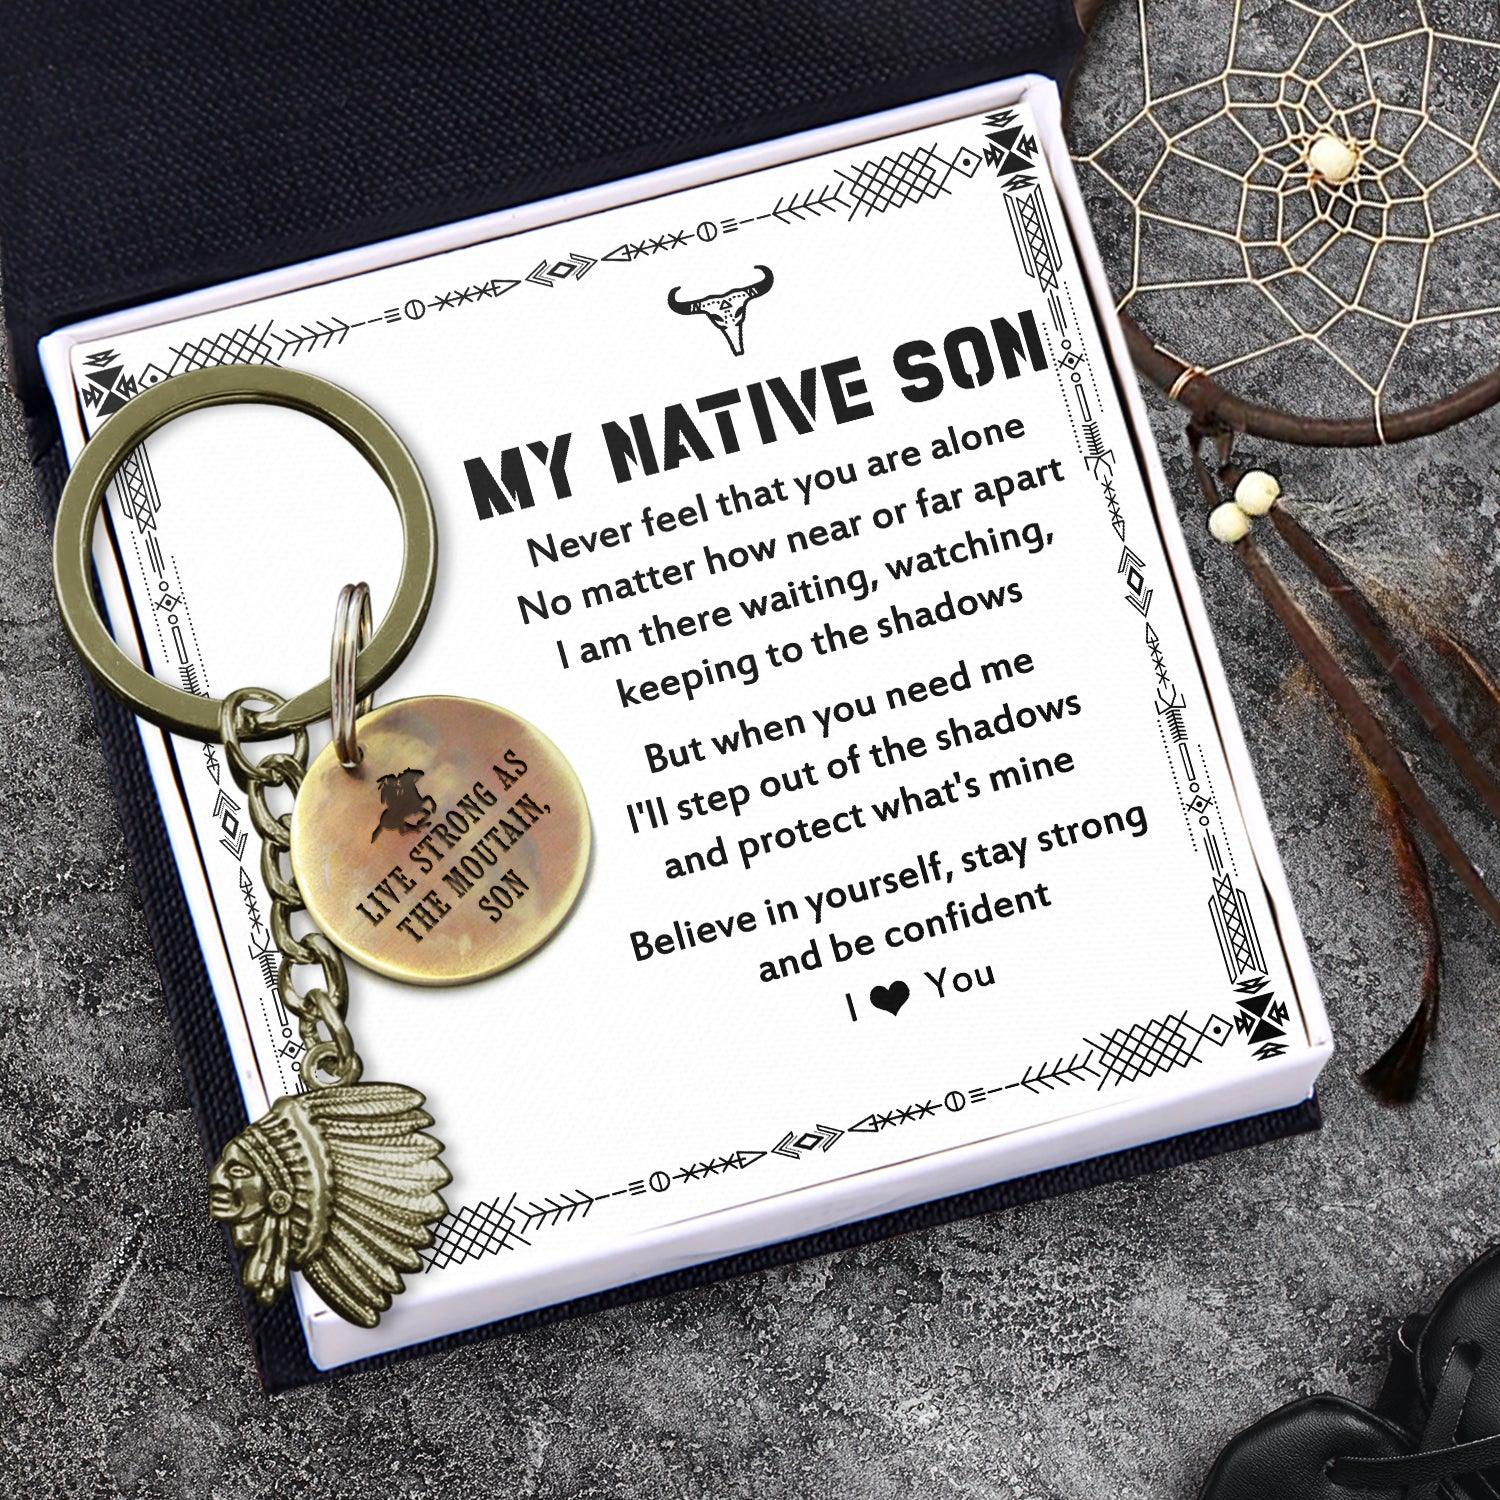 Indian Chief Keychain - Native American - To My Native Son - Believe In Yourself, Stay Strong And Be Confident - Augkek16002 - Gifts Holder